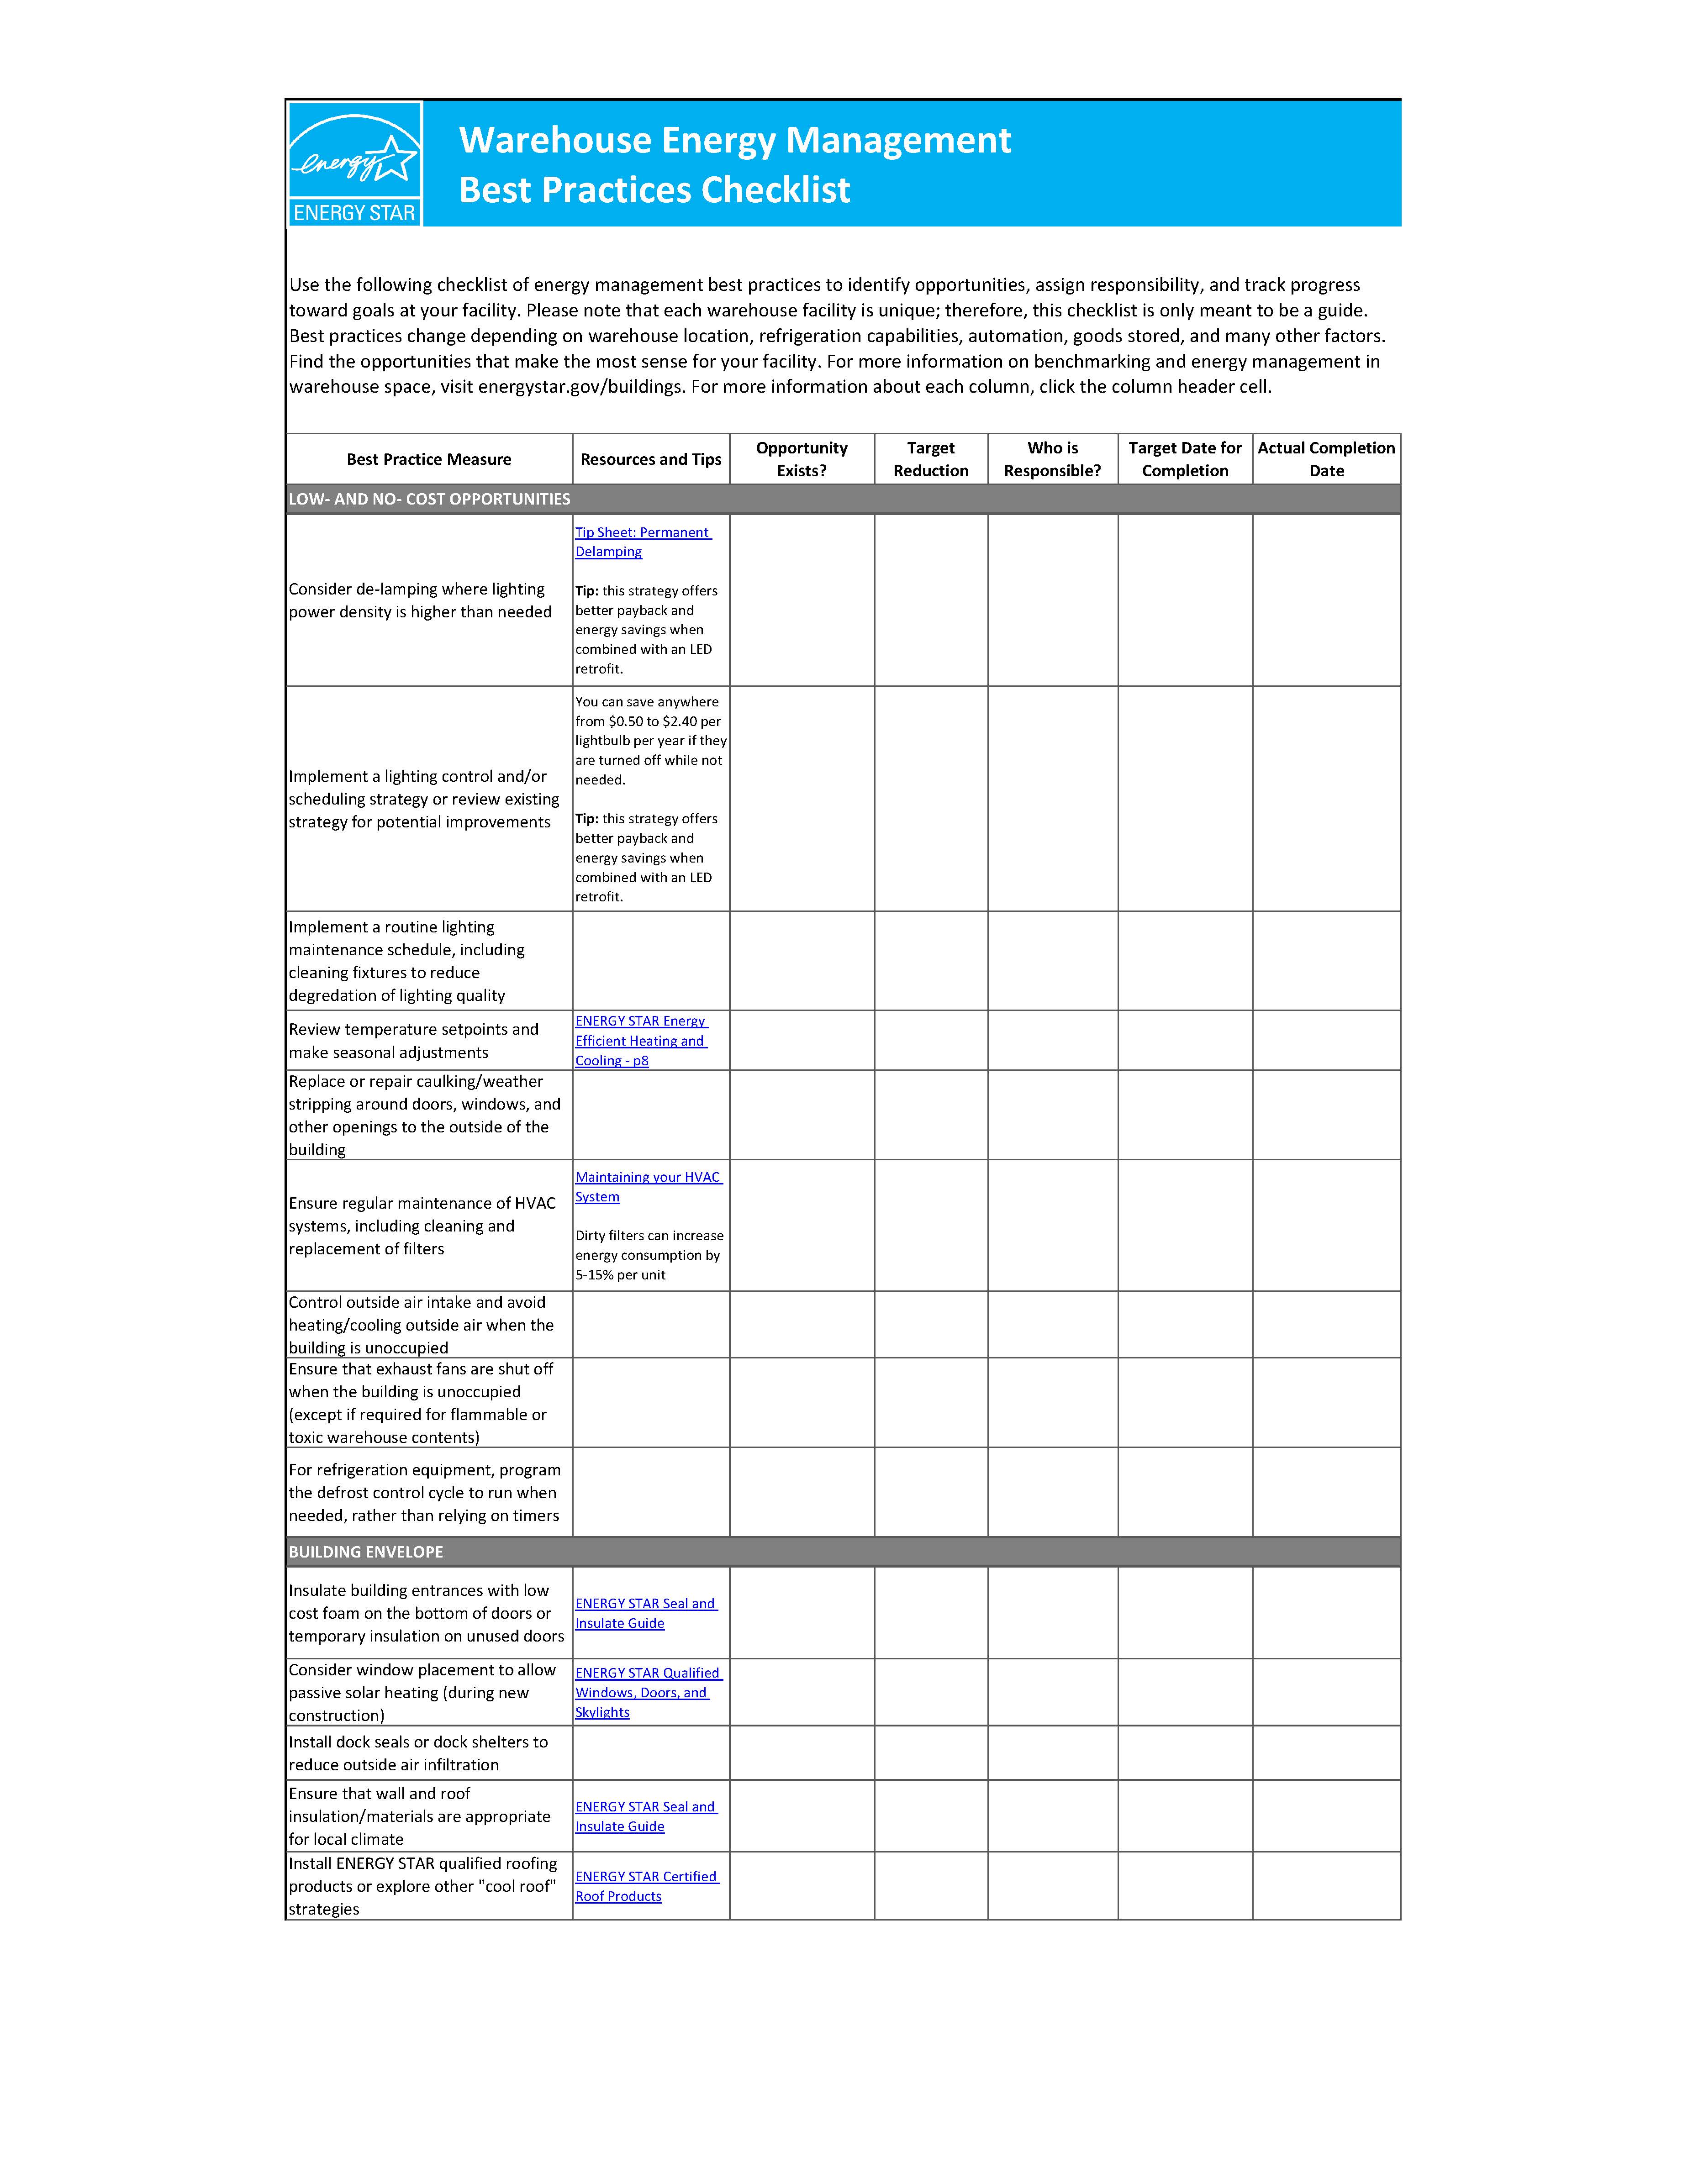 Screen shot of first page of Warehouse Energy Management Best Practices Checklist